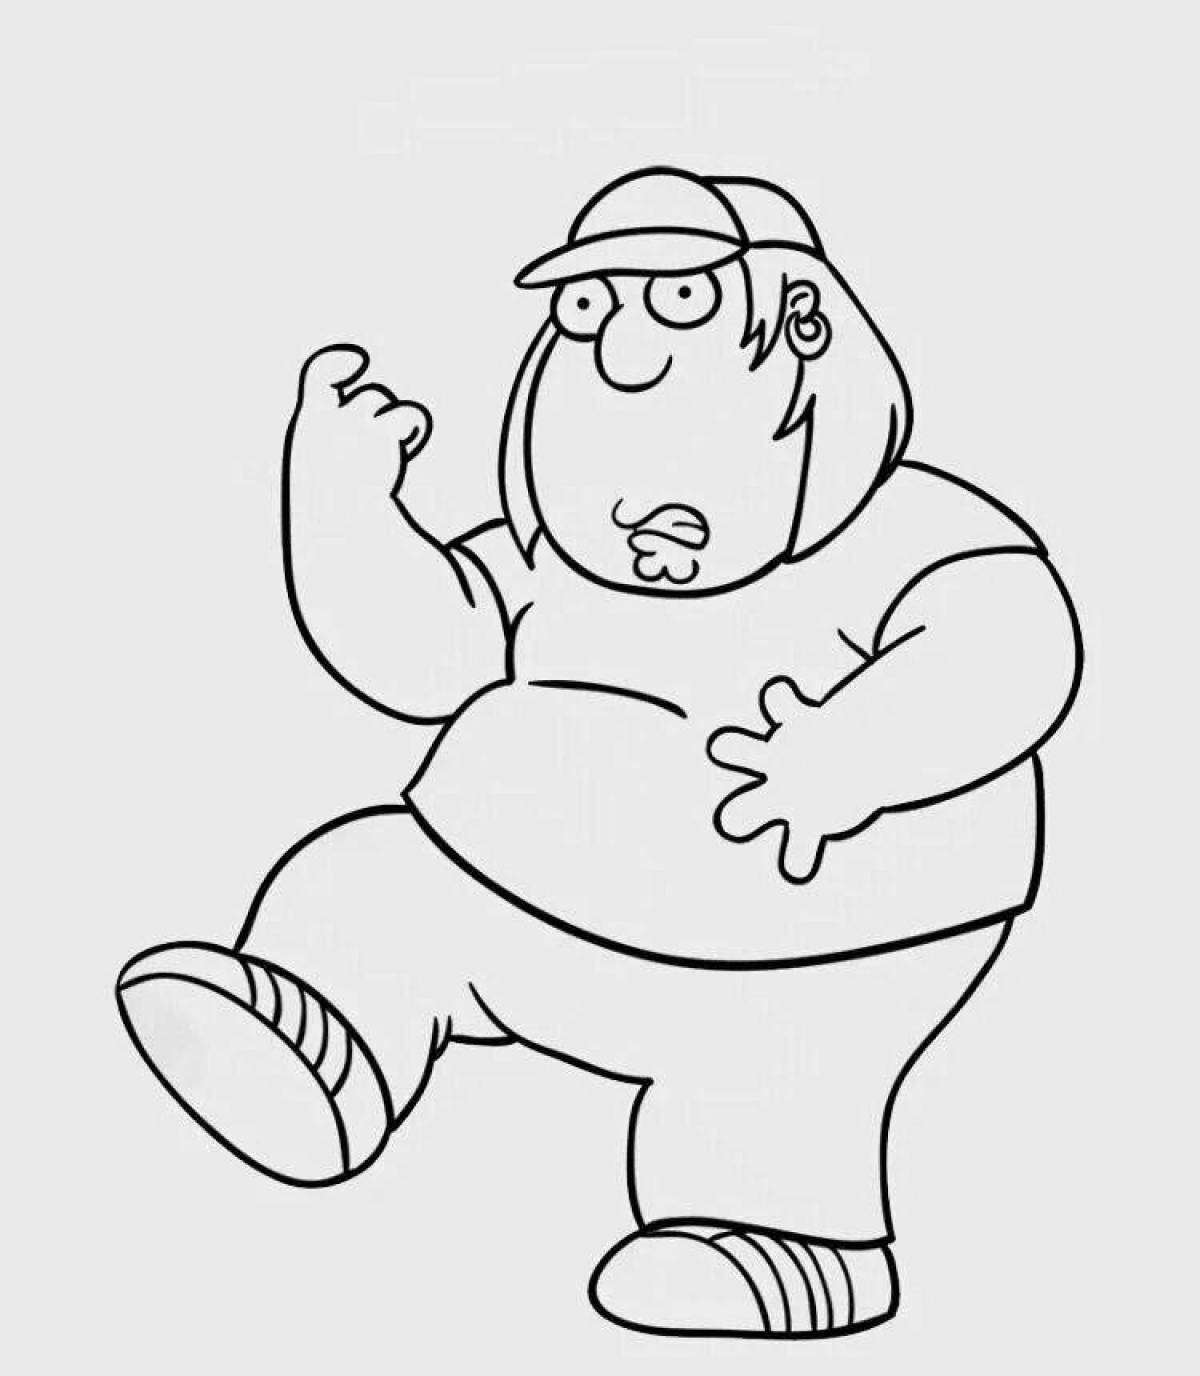 Peter griffin's amazing coloring page